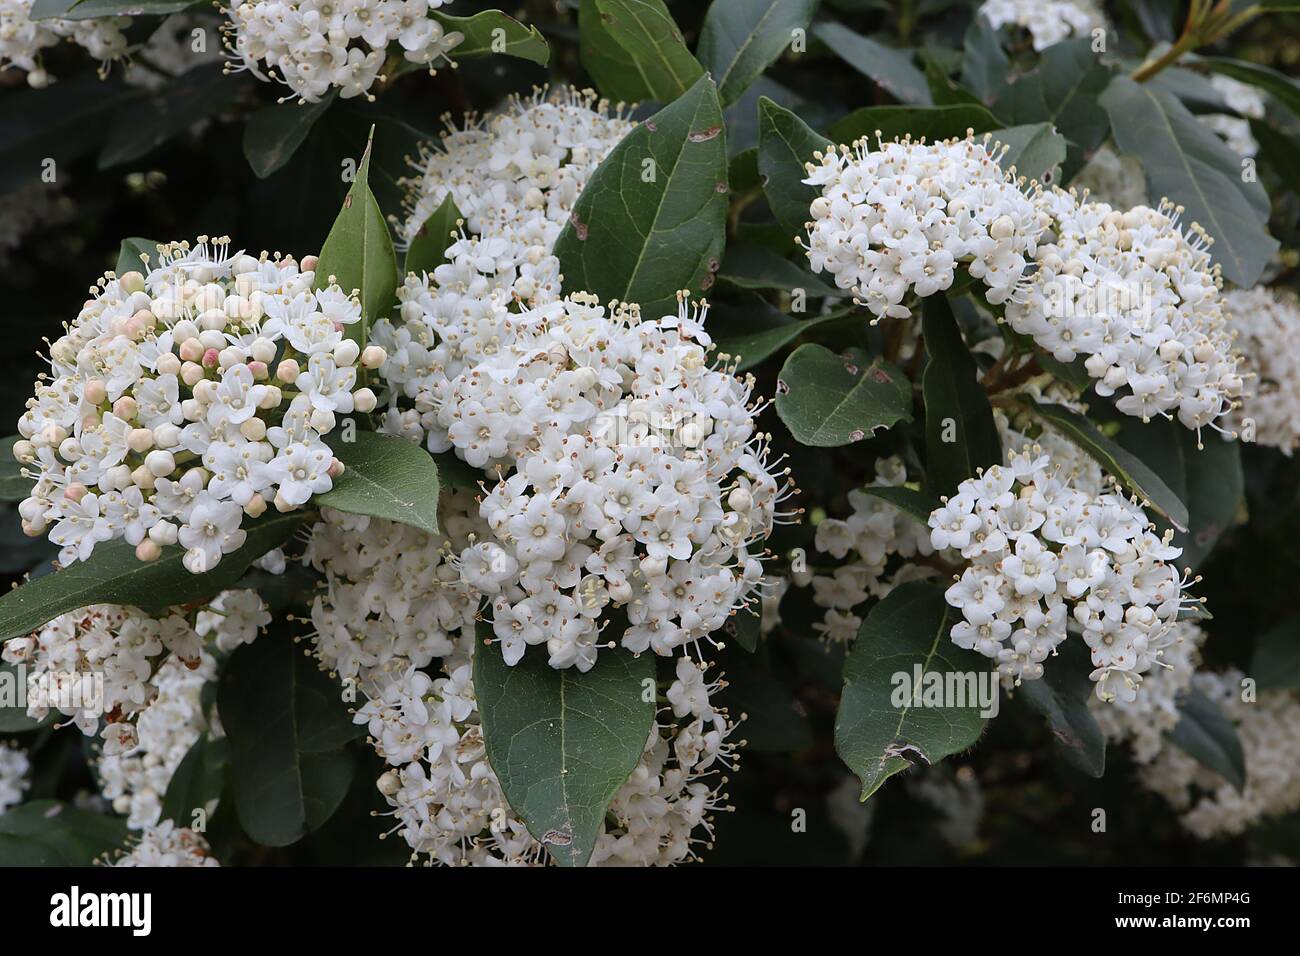 Viburnum tinus ‘French White’ laurustinus French White – clusters of small scented white flowers and large leathery leaves,  April, England, UK Stock Photo